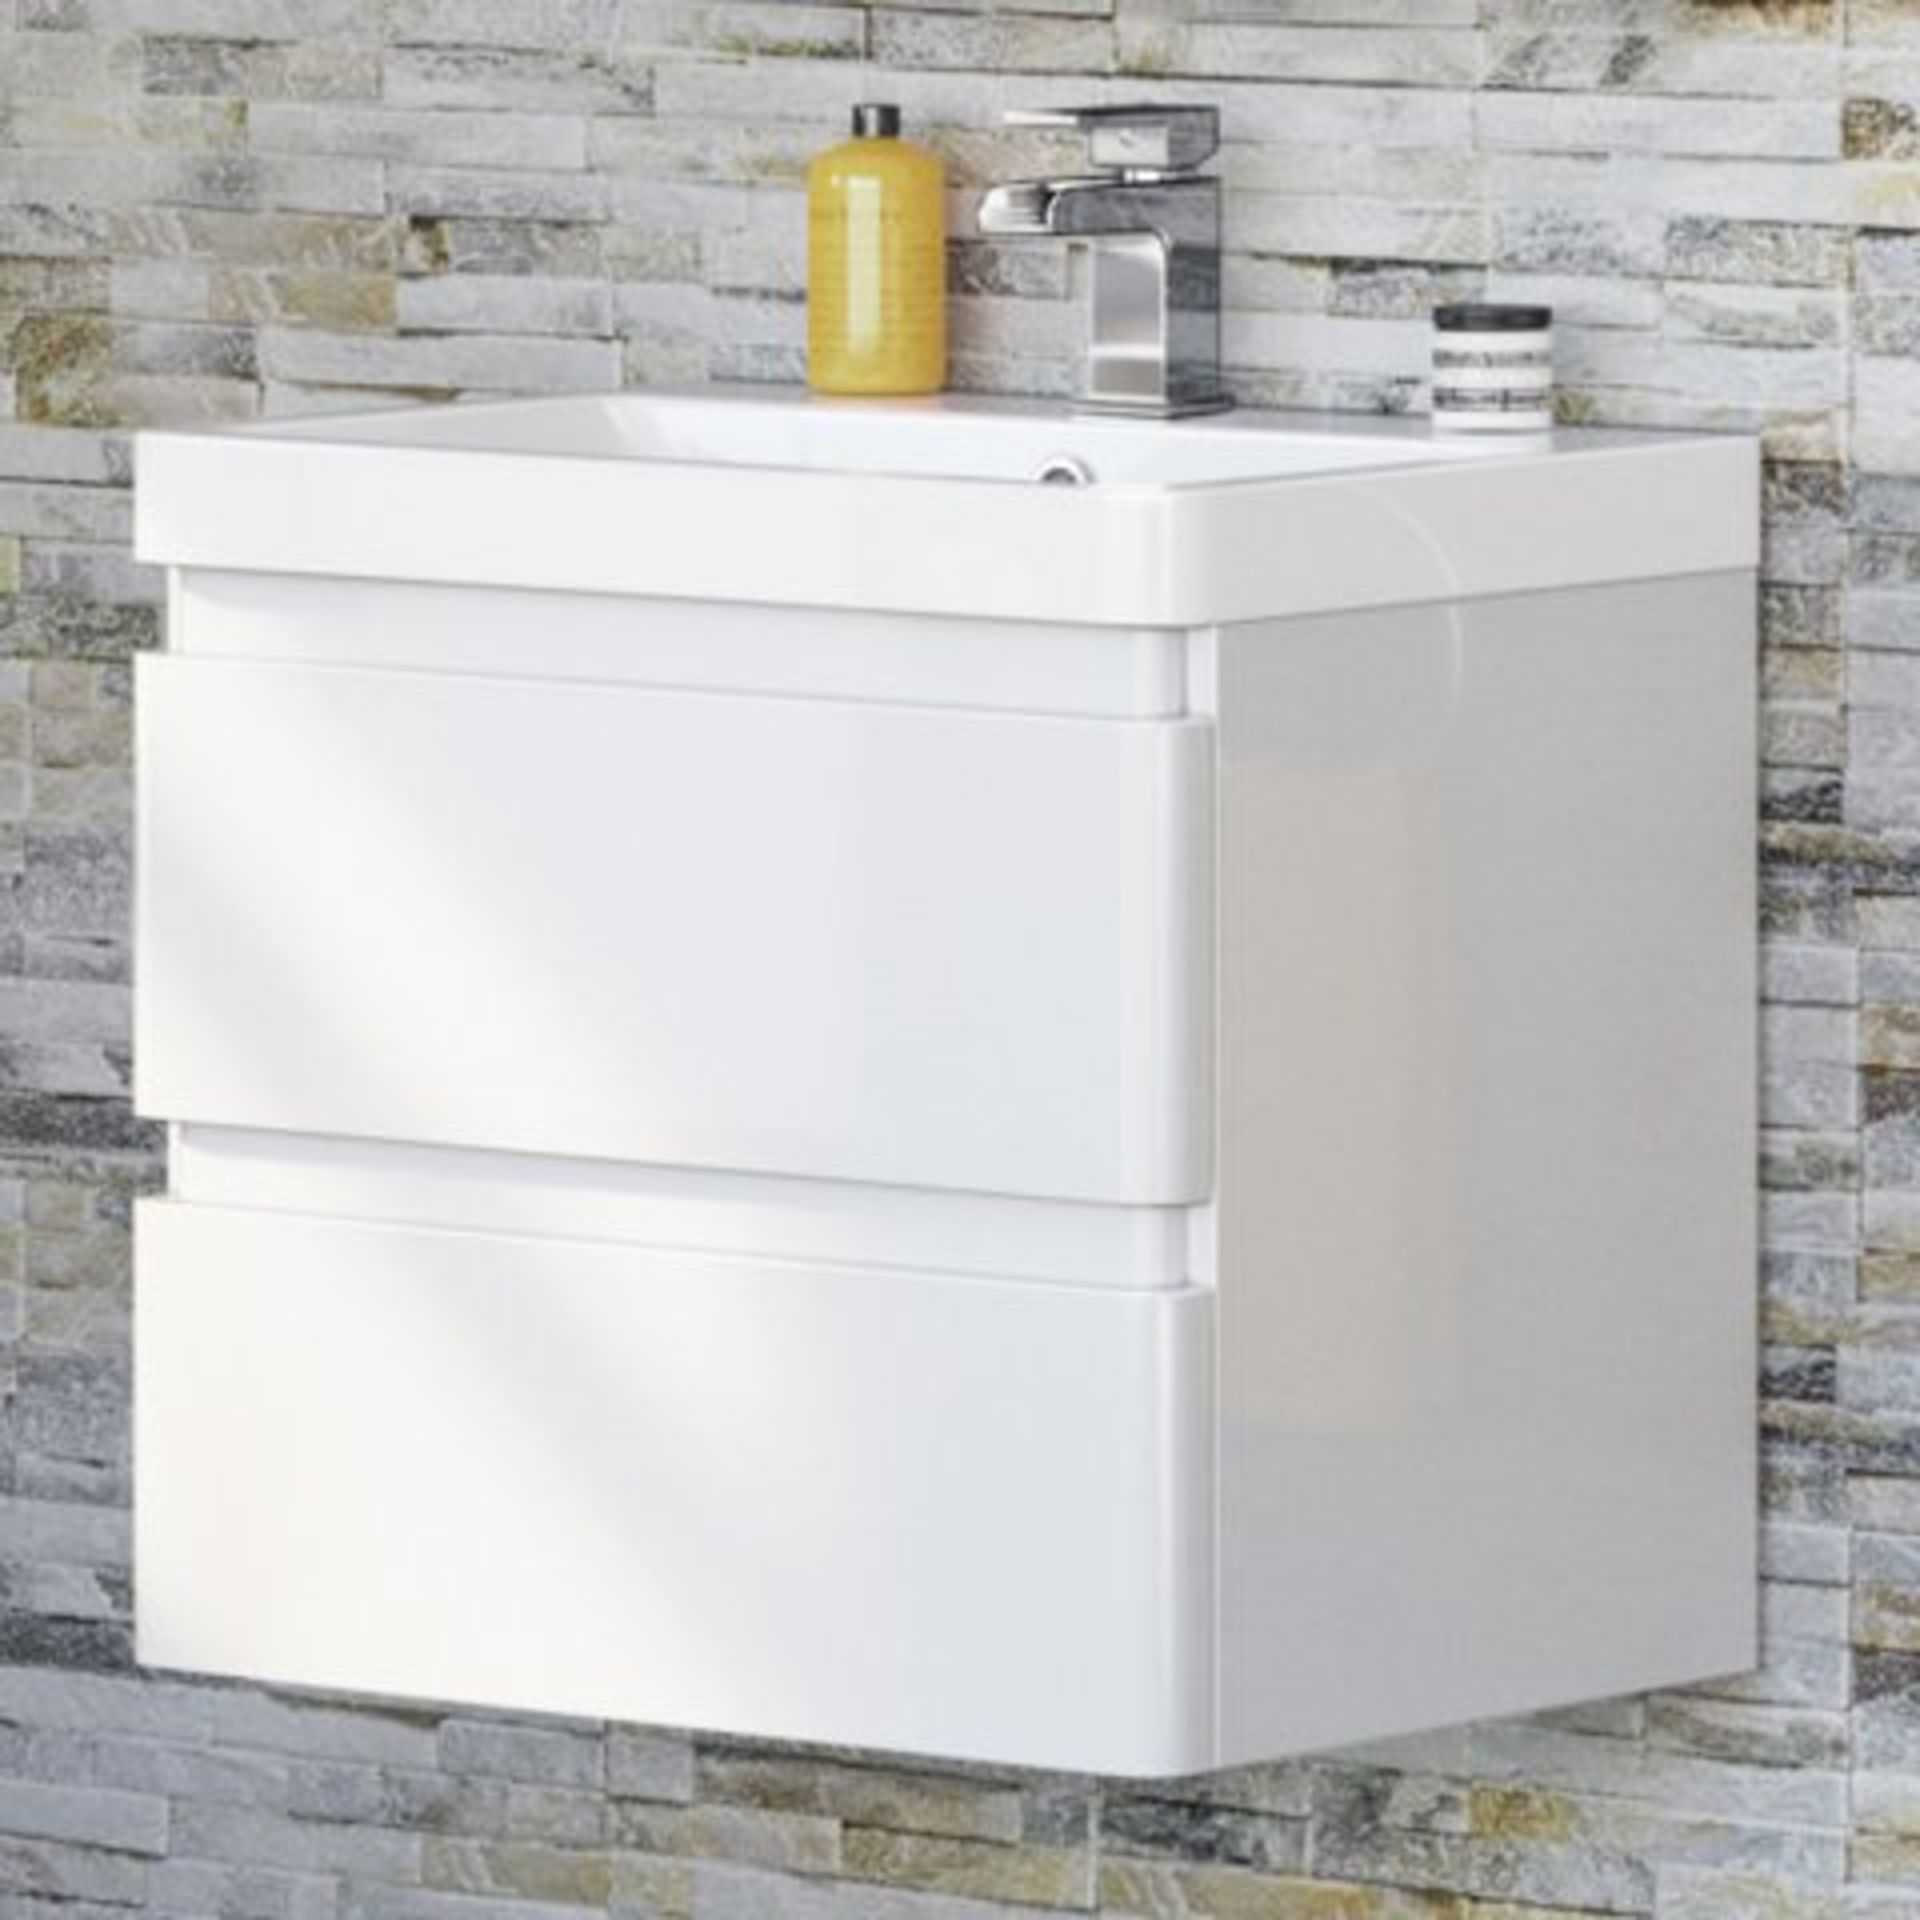 (L75) 600mm Denver II Gloss White Built In Basin Drawer Unit - Wall Hung. RRP £599.99. COMES